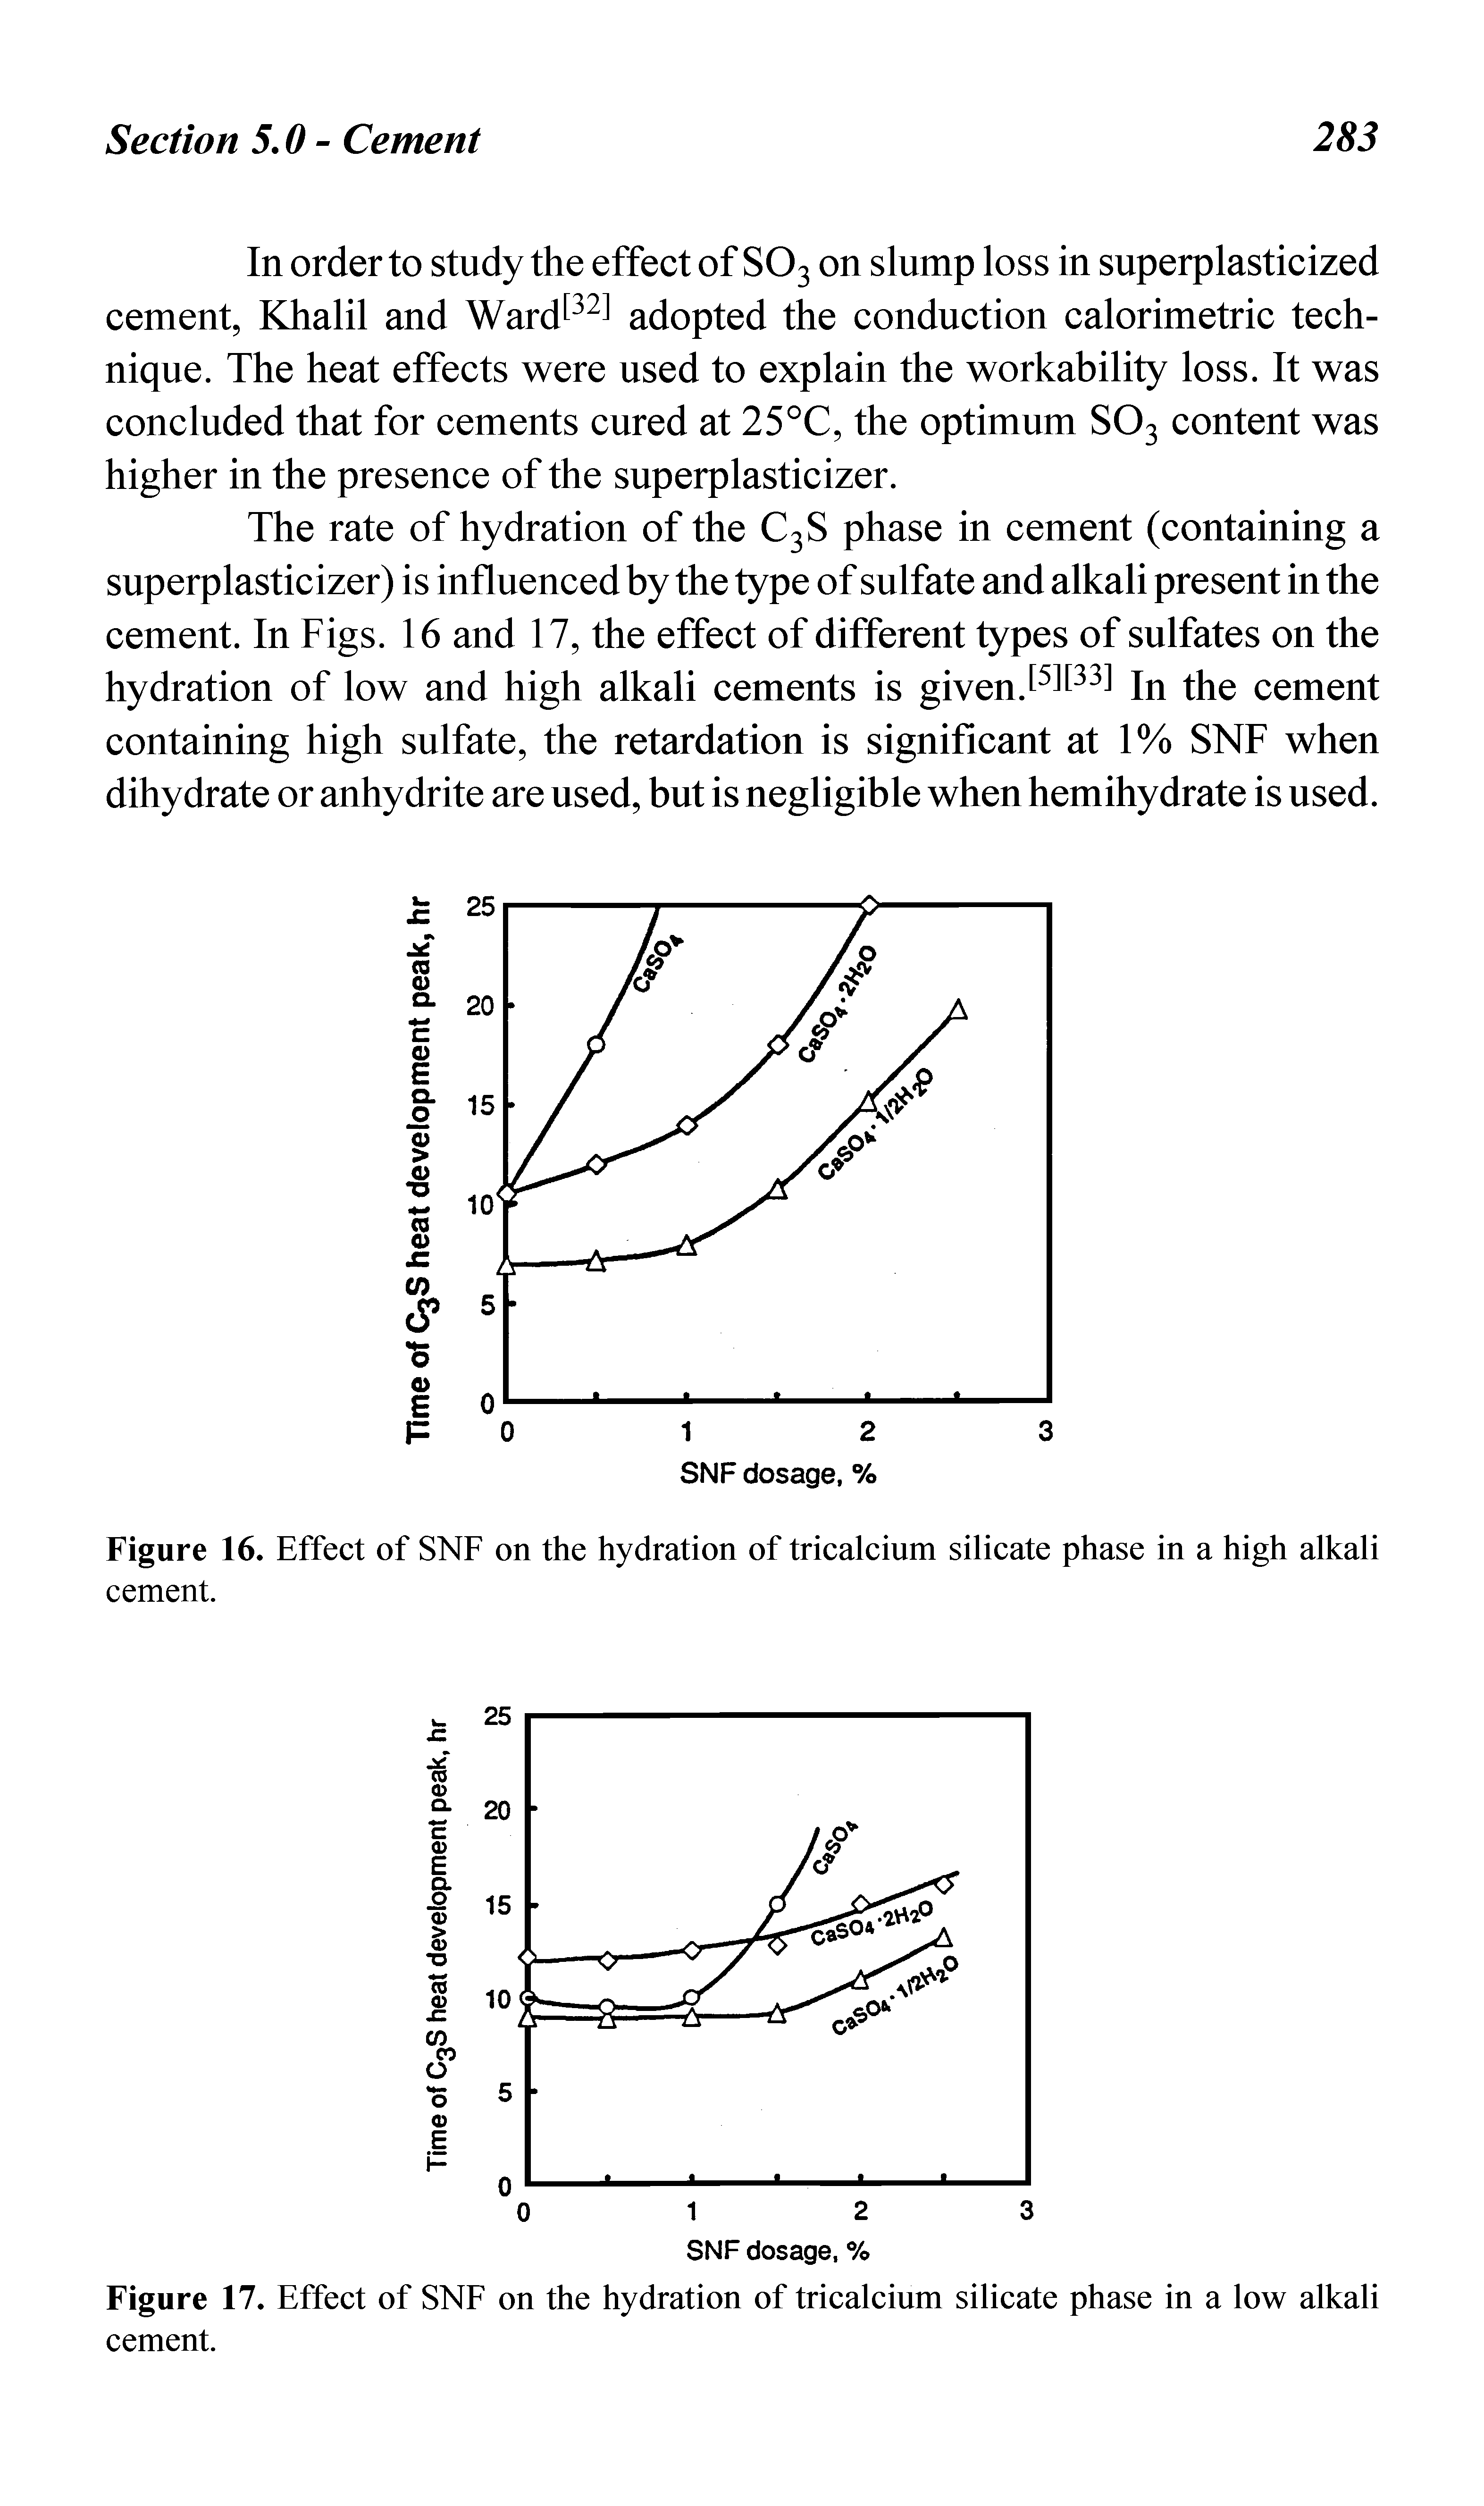 Figure 16. Effect of SNF on the hydration of tricalcium silicate phase in a high alkali cement.